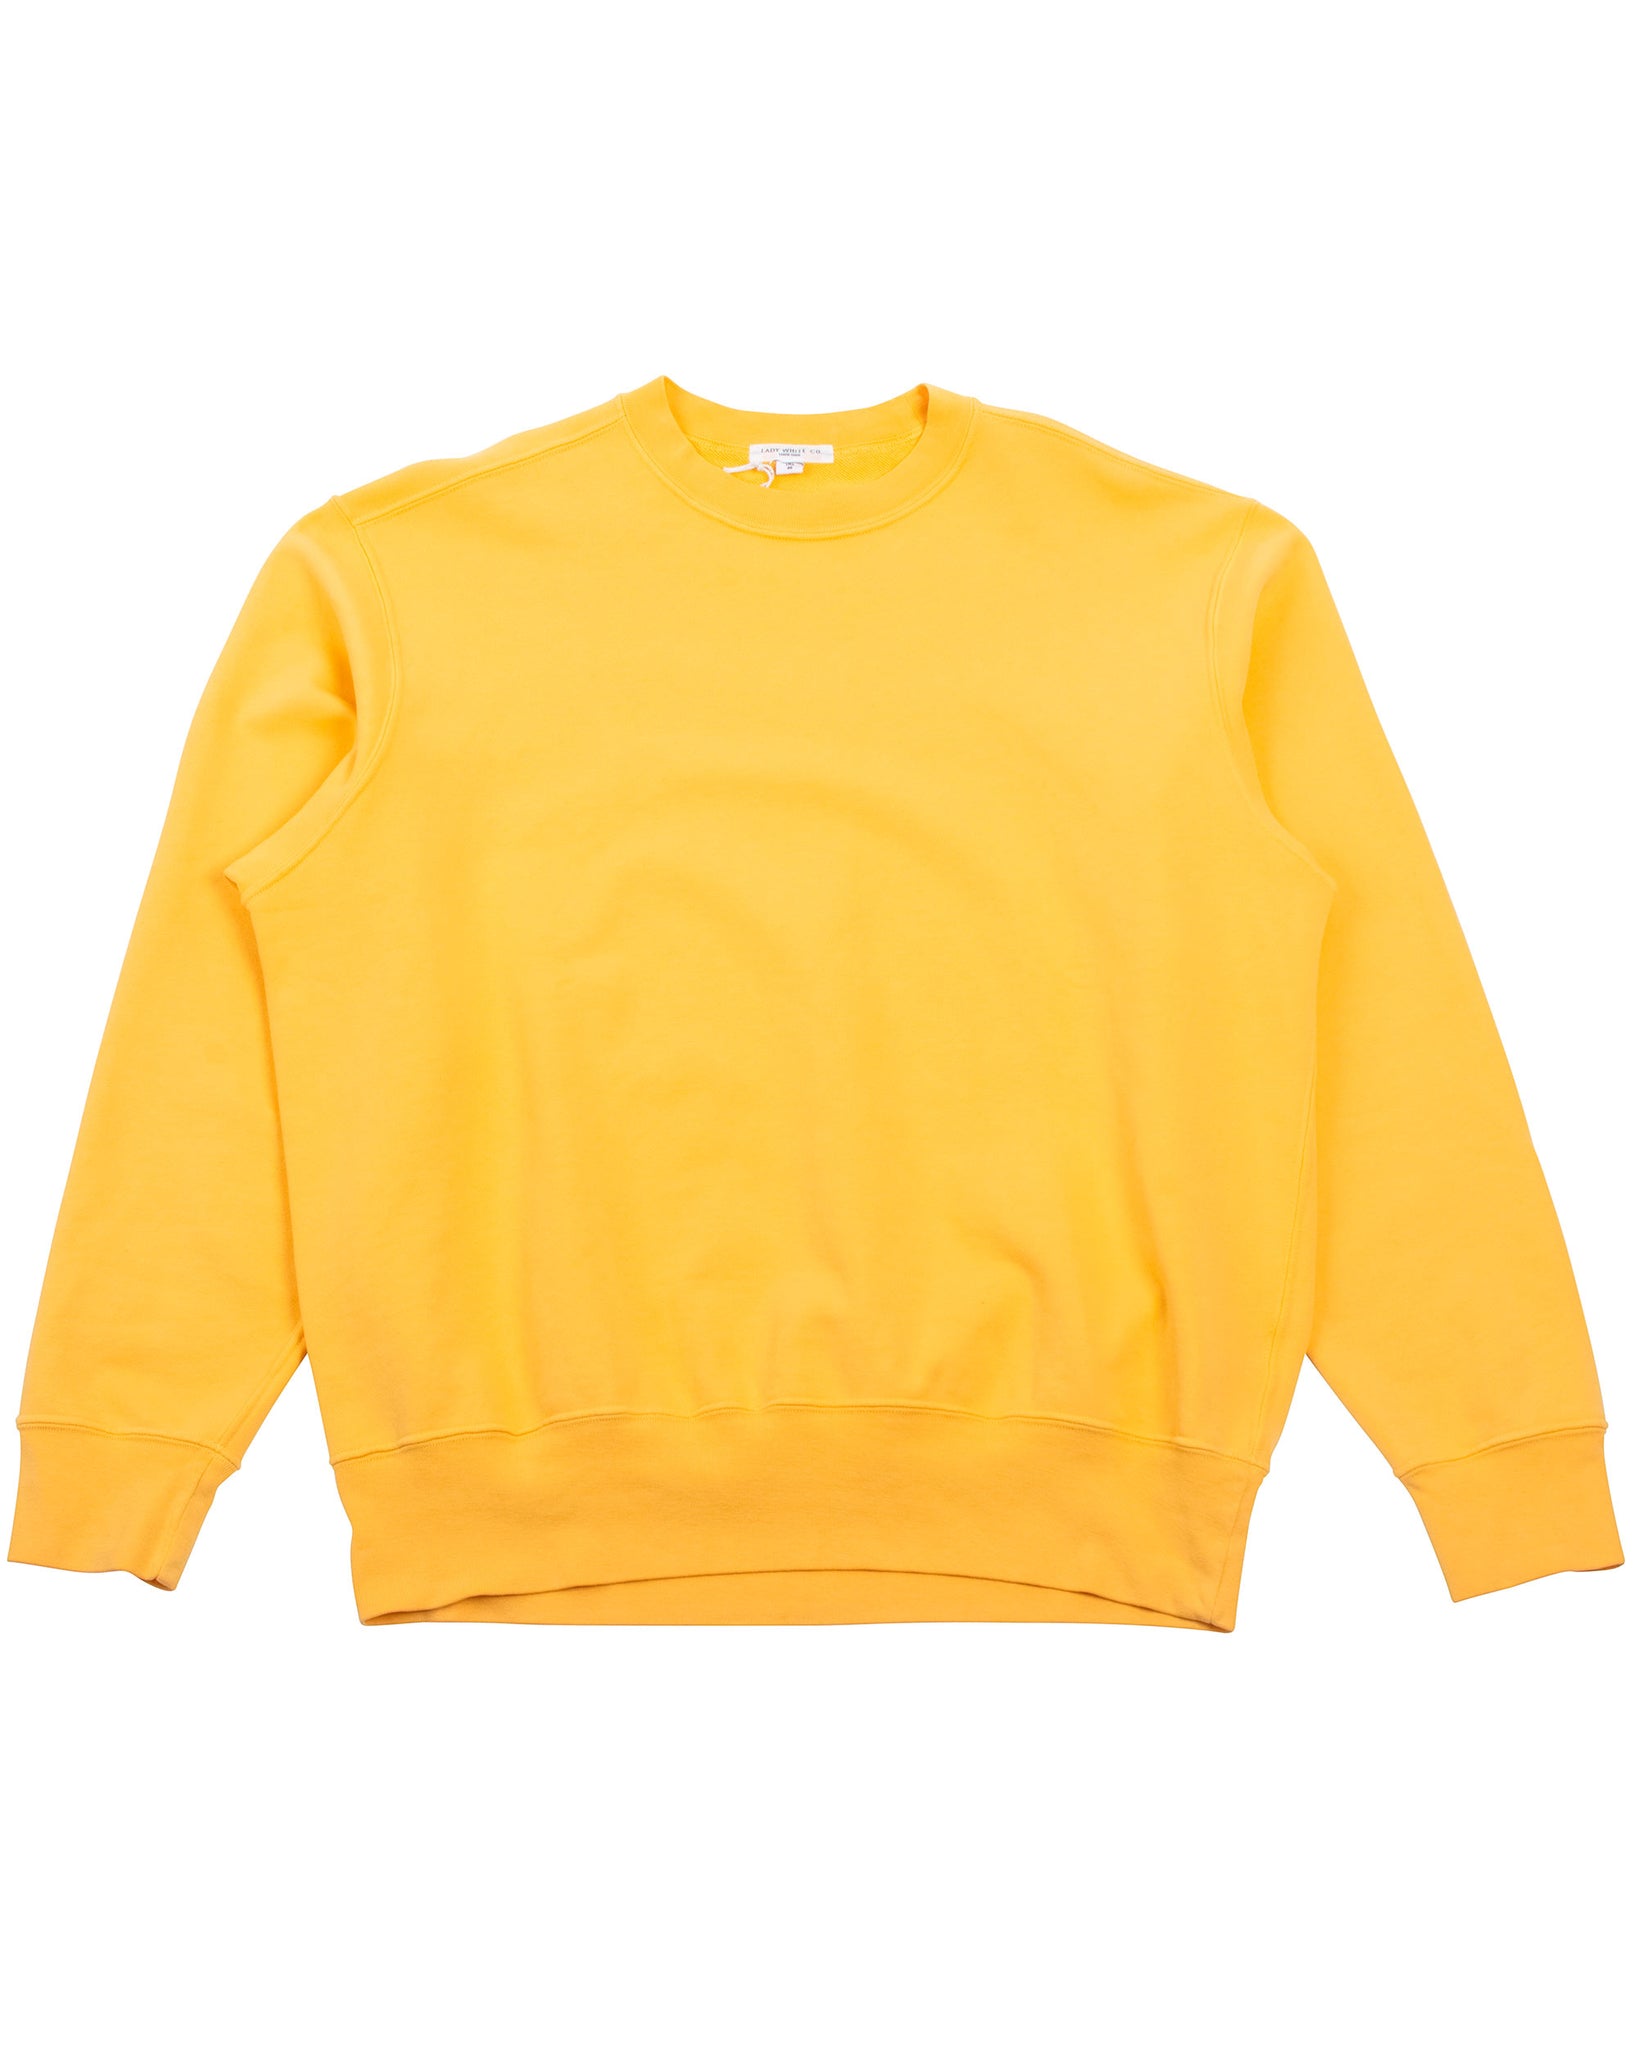 Lady White Co. Relaxed Sweatshirt Apricot